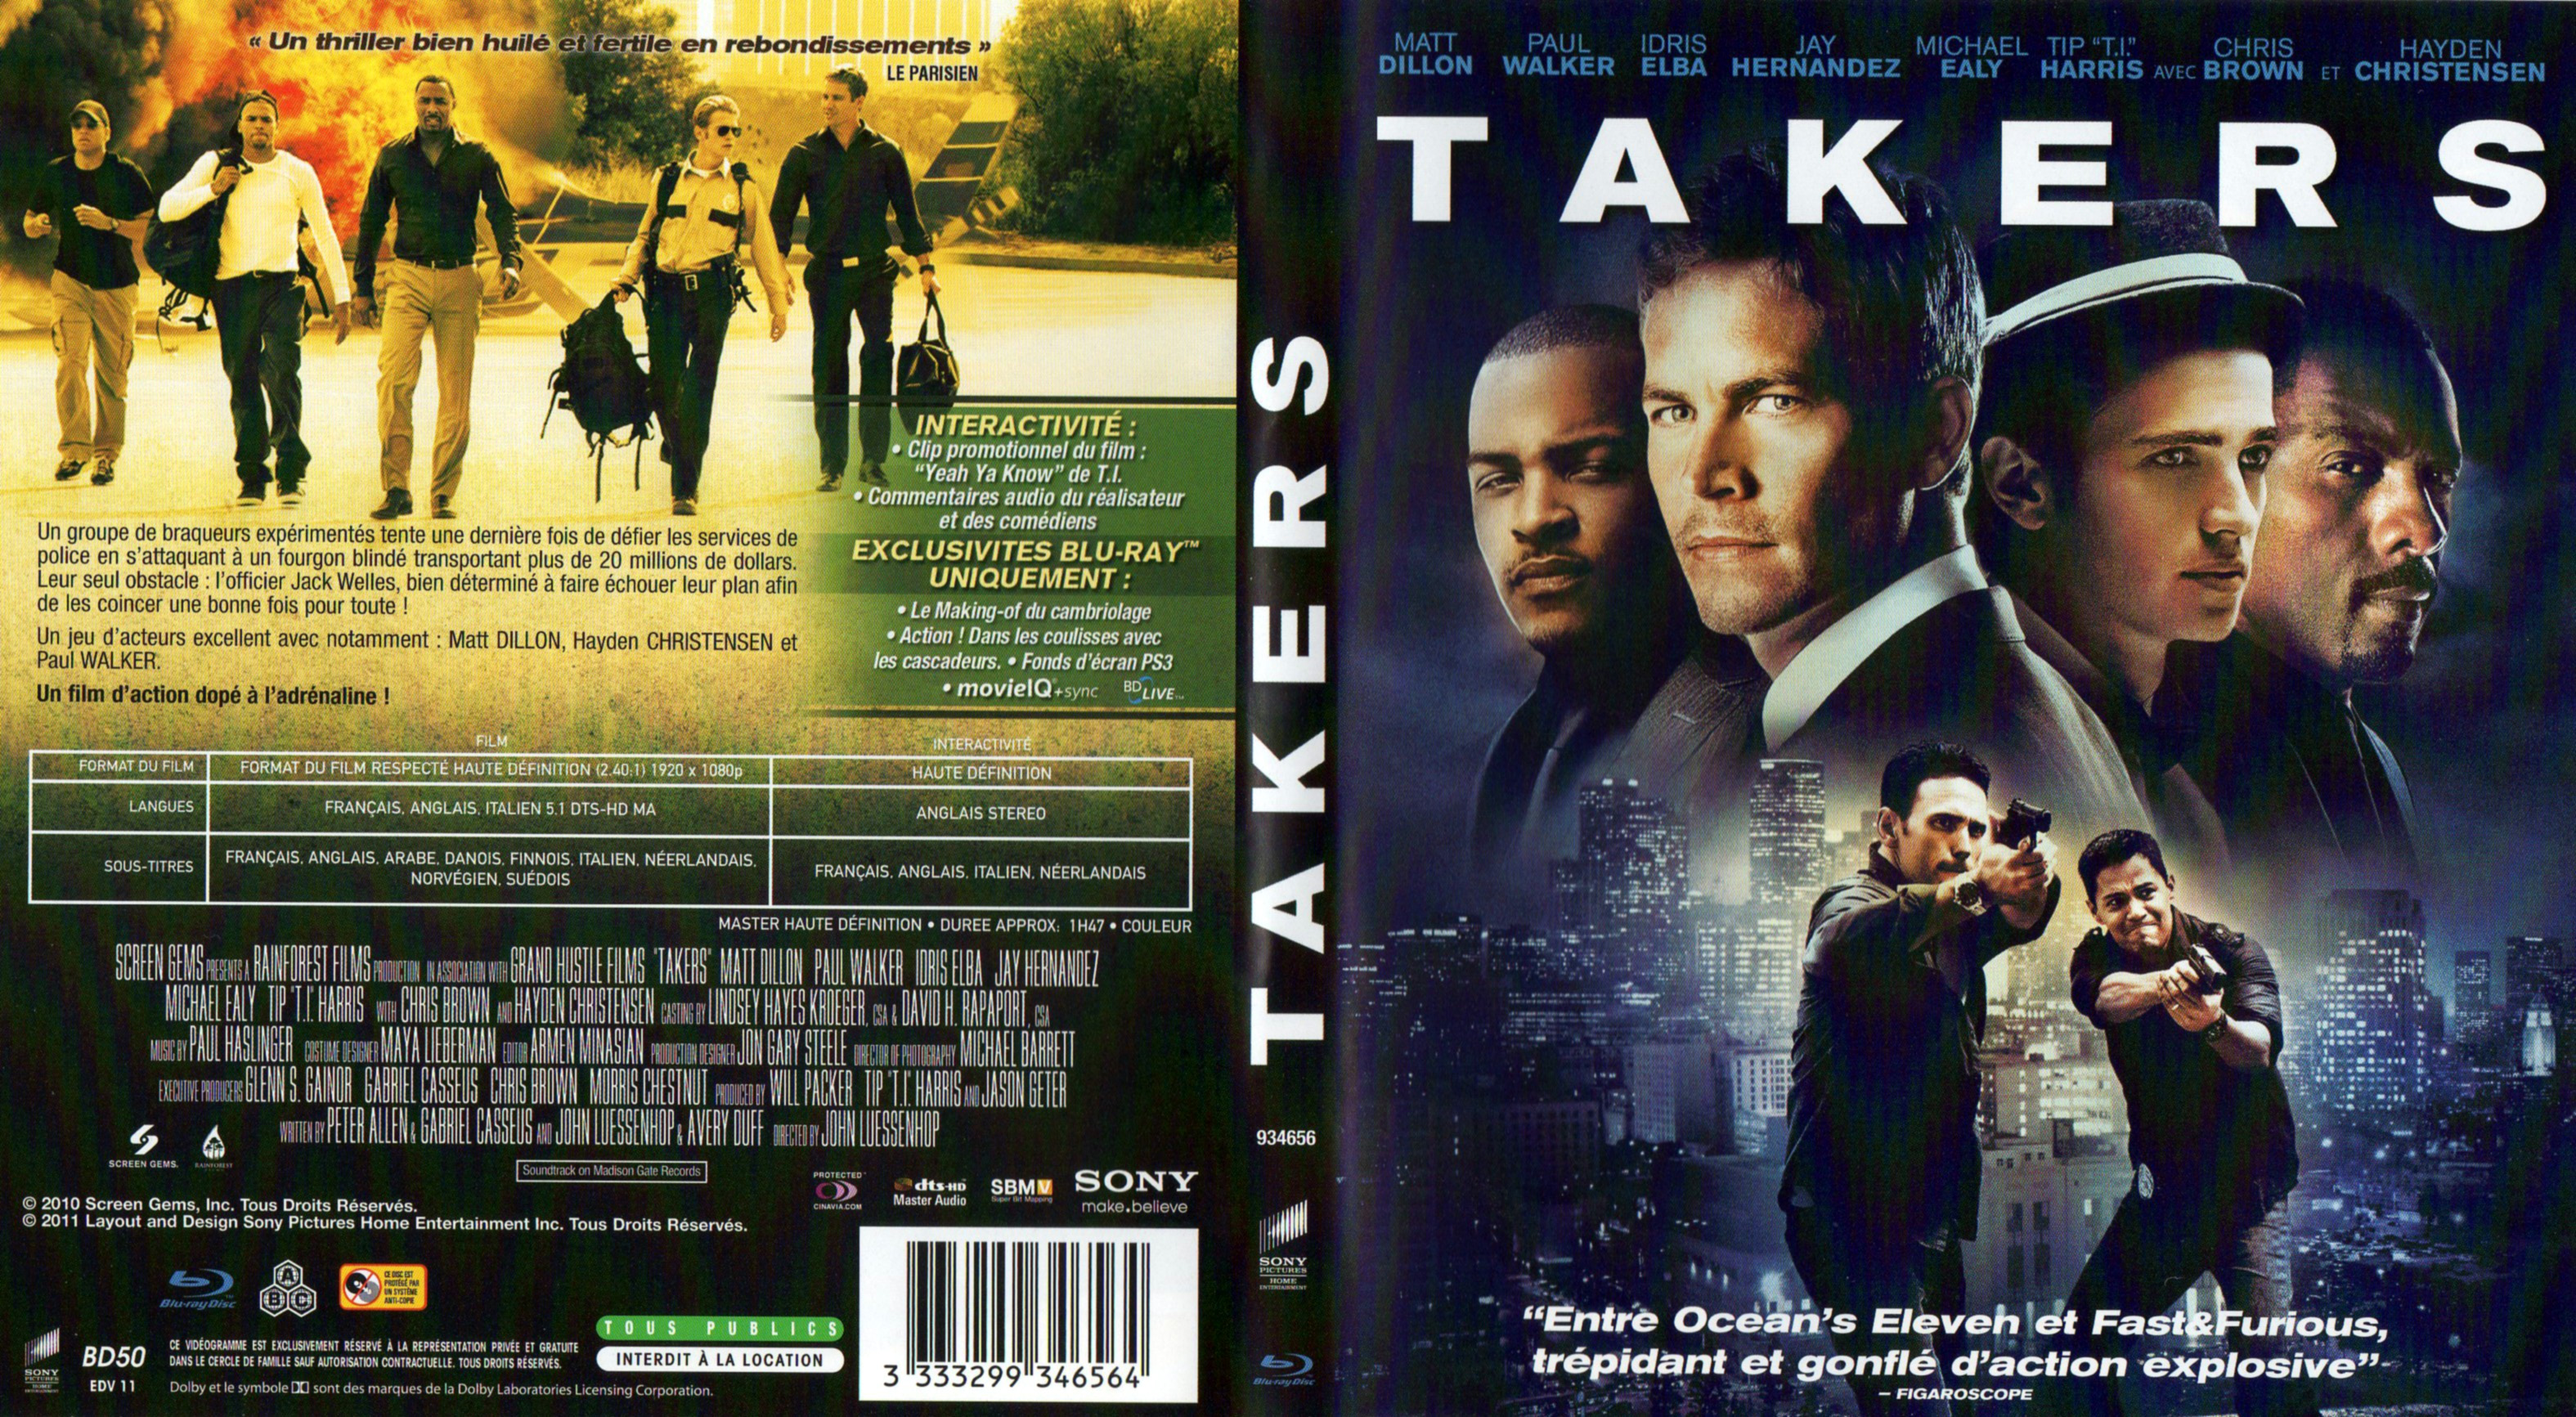 Jaquette DVD Takers (BLU-RAY)